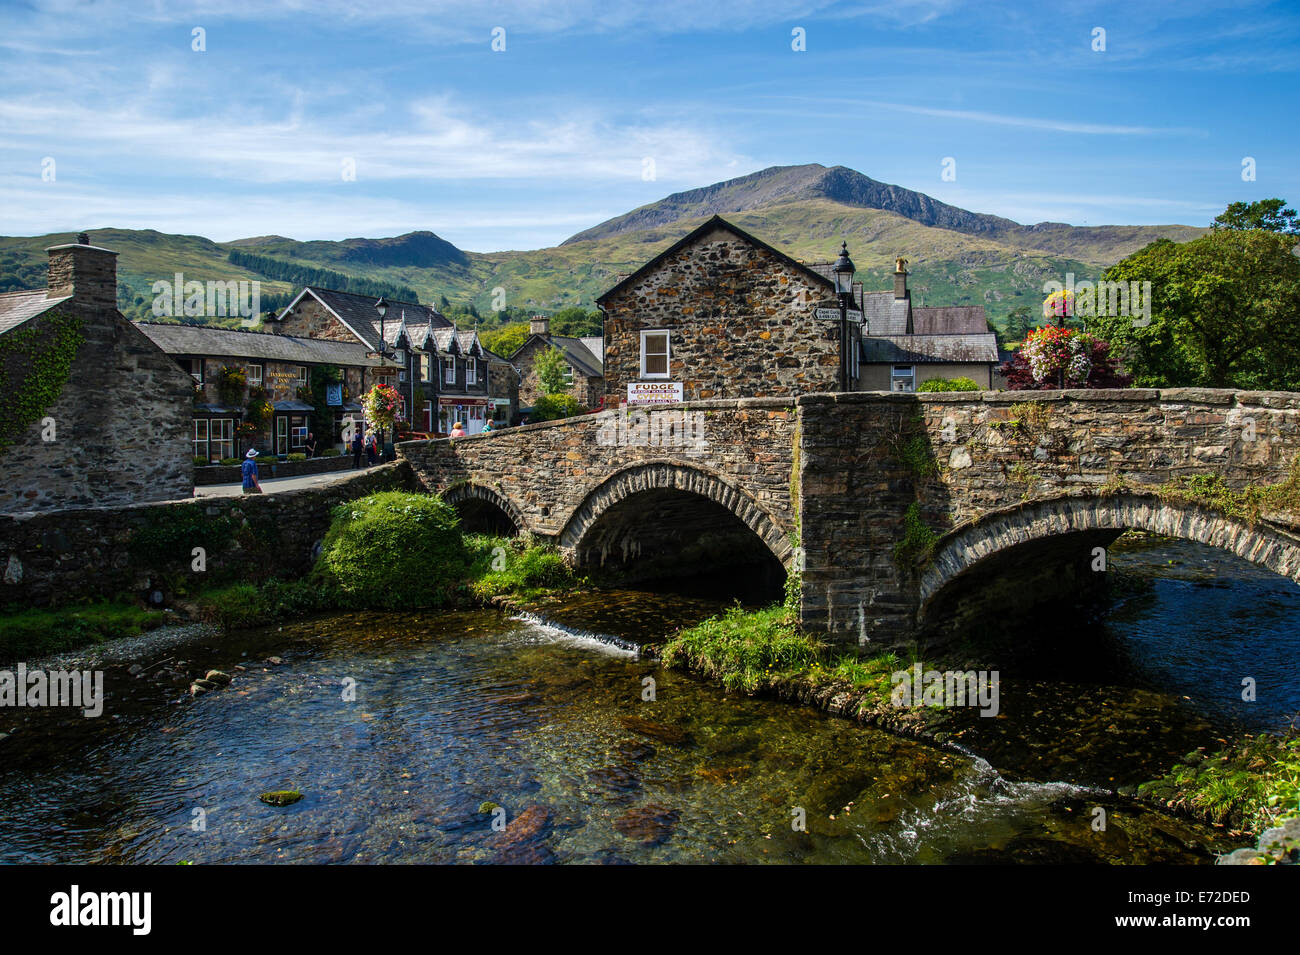 View of the river and bridge at Beddgelert, Snowdonia National Park,North Wales Stock Photo